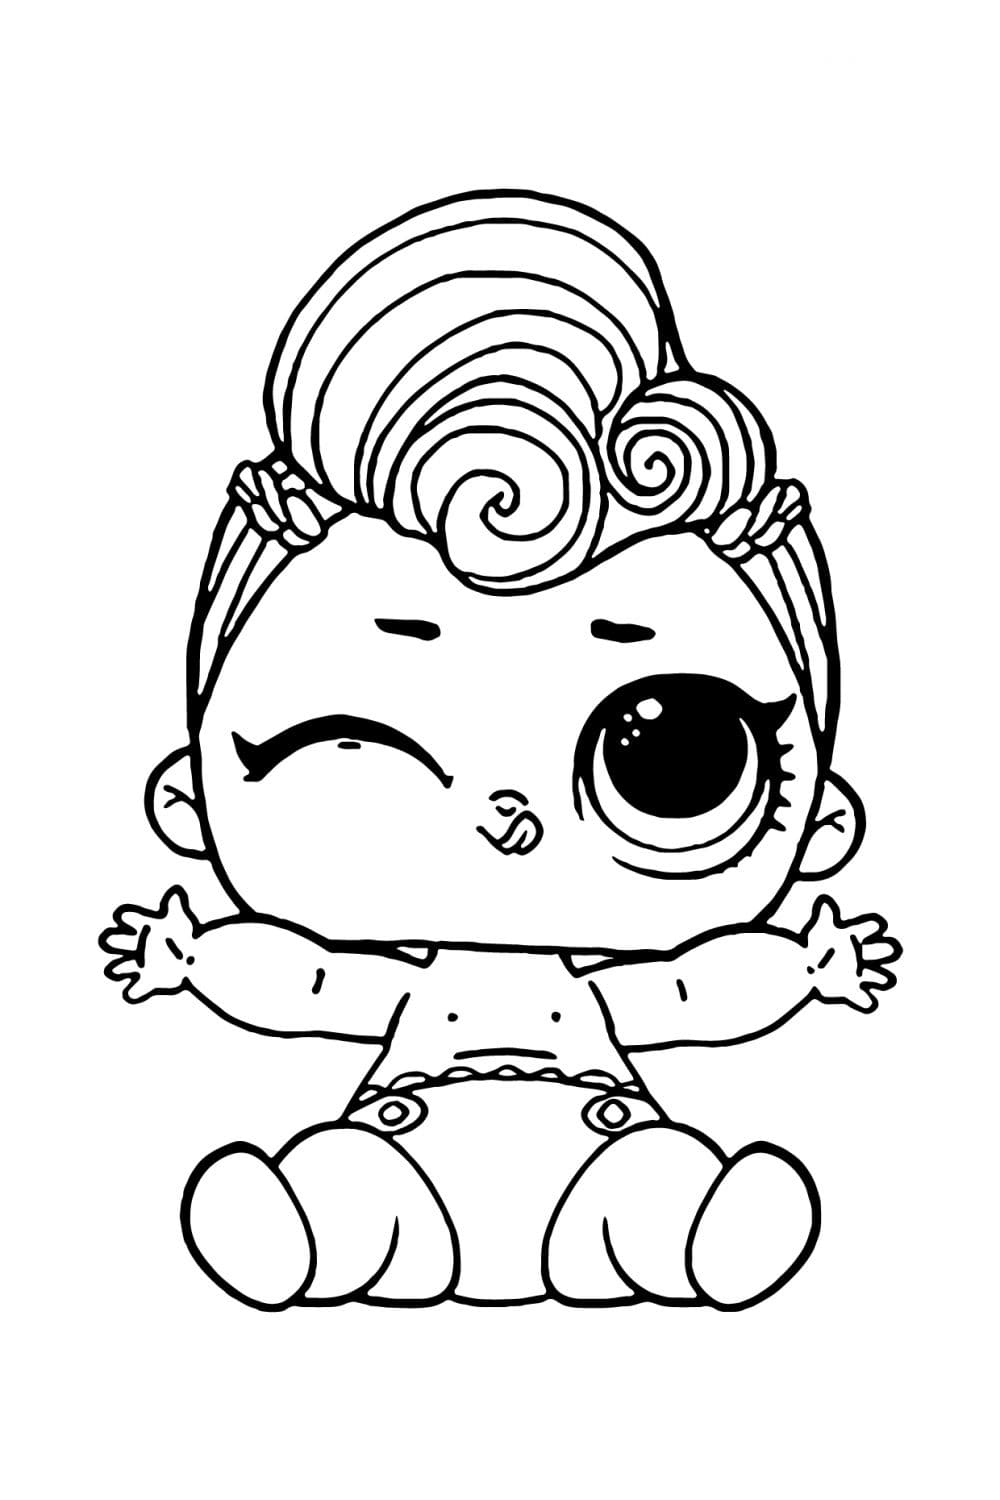 LOL Baby Grunge Coloring Page   Free Printable Coloring Pages For ...